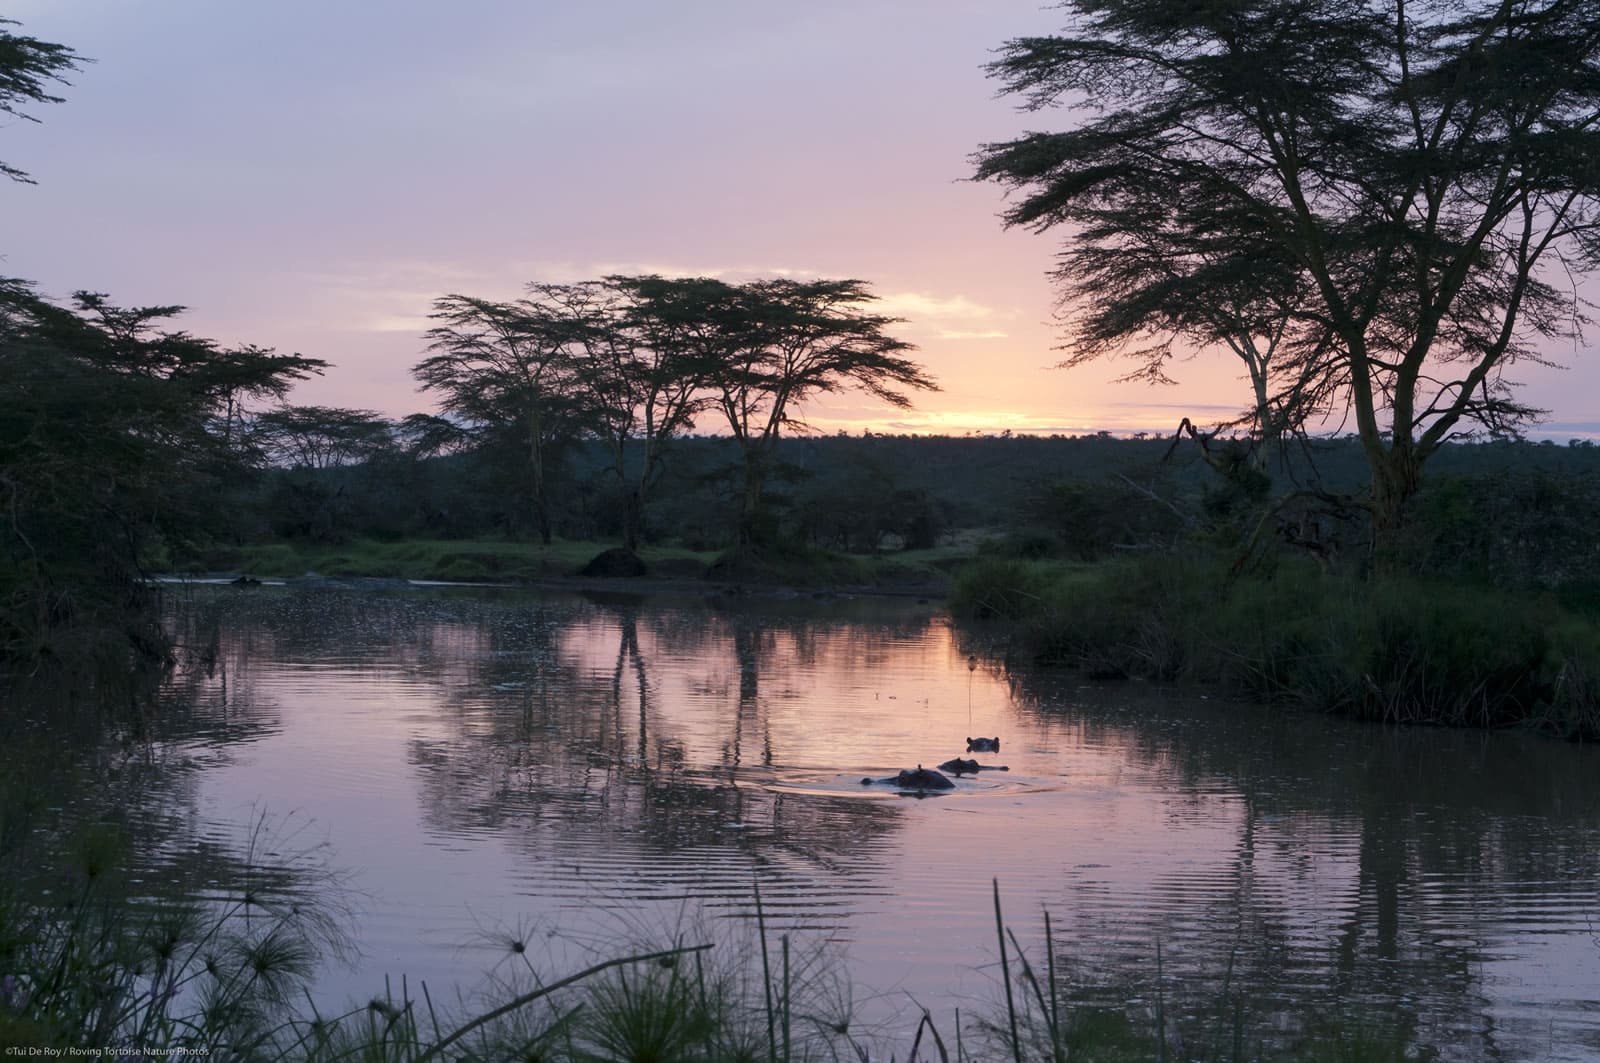 Hippos in the Sosian river at sunset